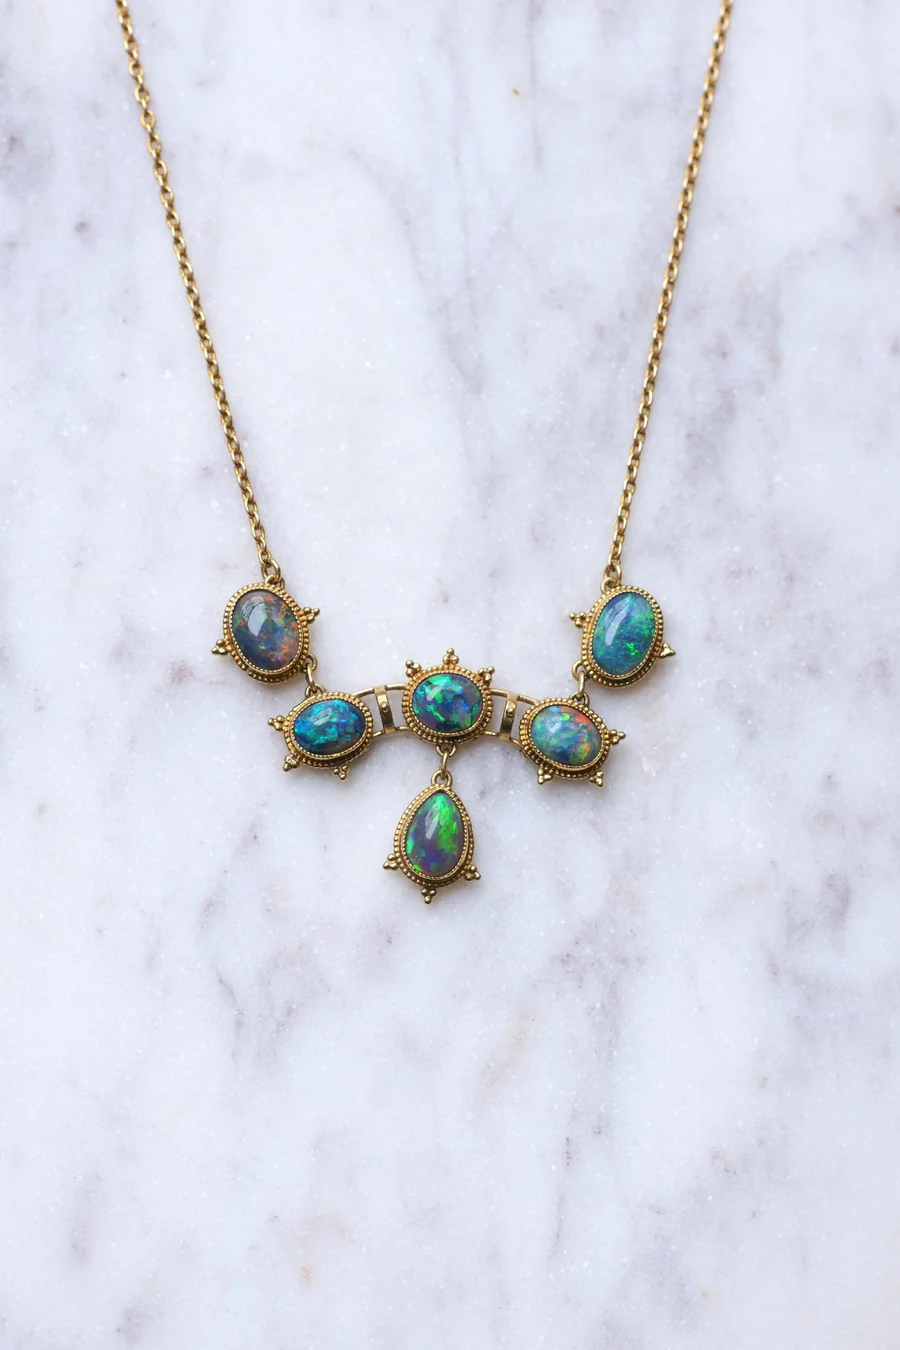 Victorian style necklace in gold set with black opals - Galerie Pénélope